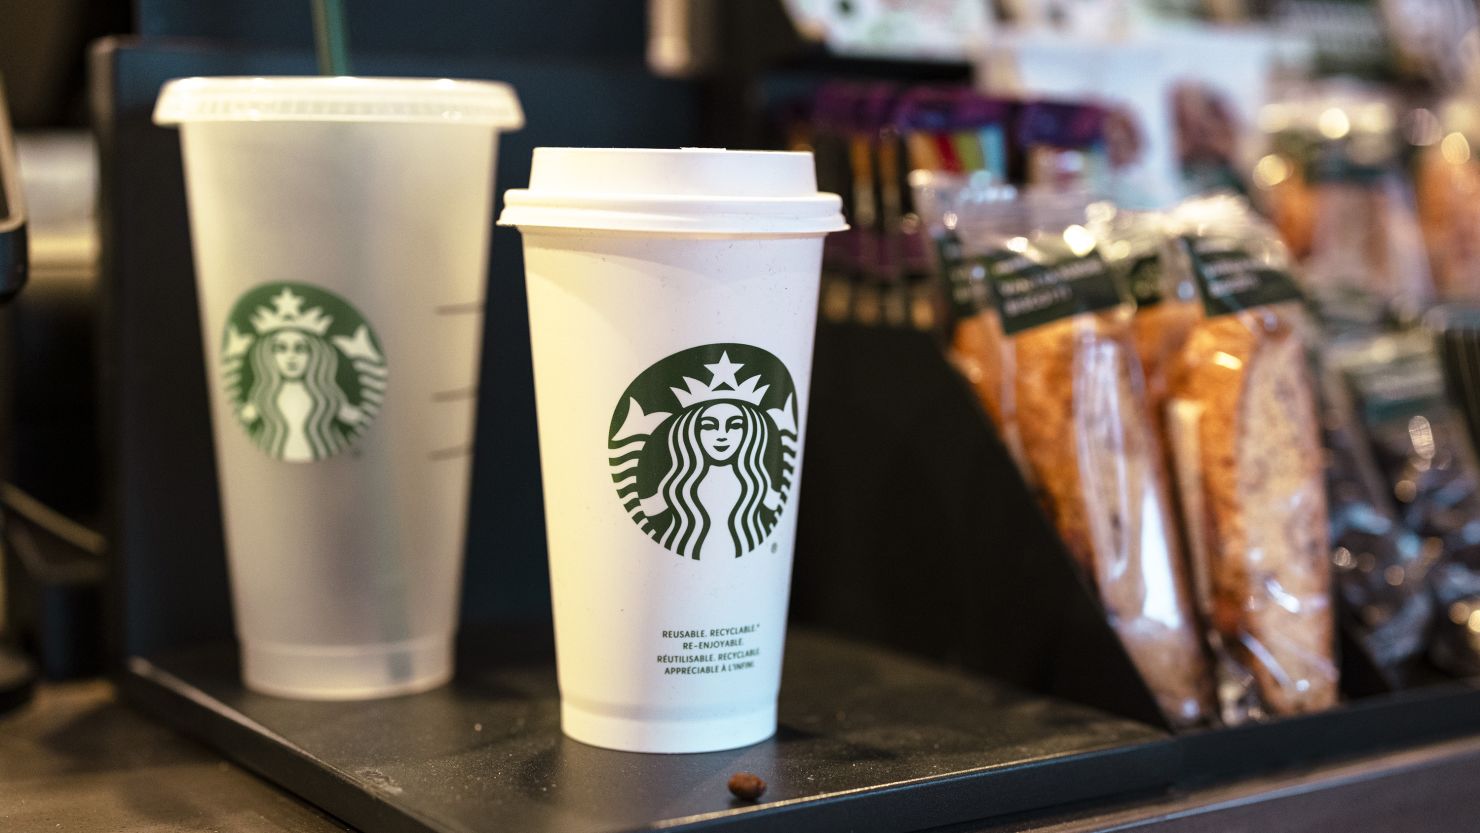 Starbucks app users will soon see an upgrade, including “significant improvements” to the wait time metric.